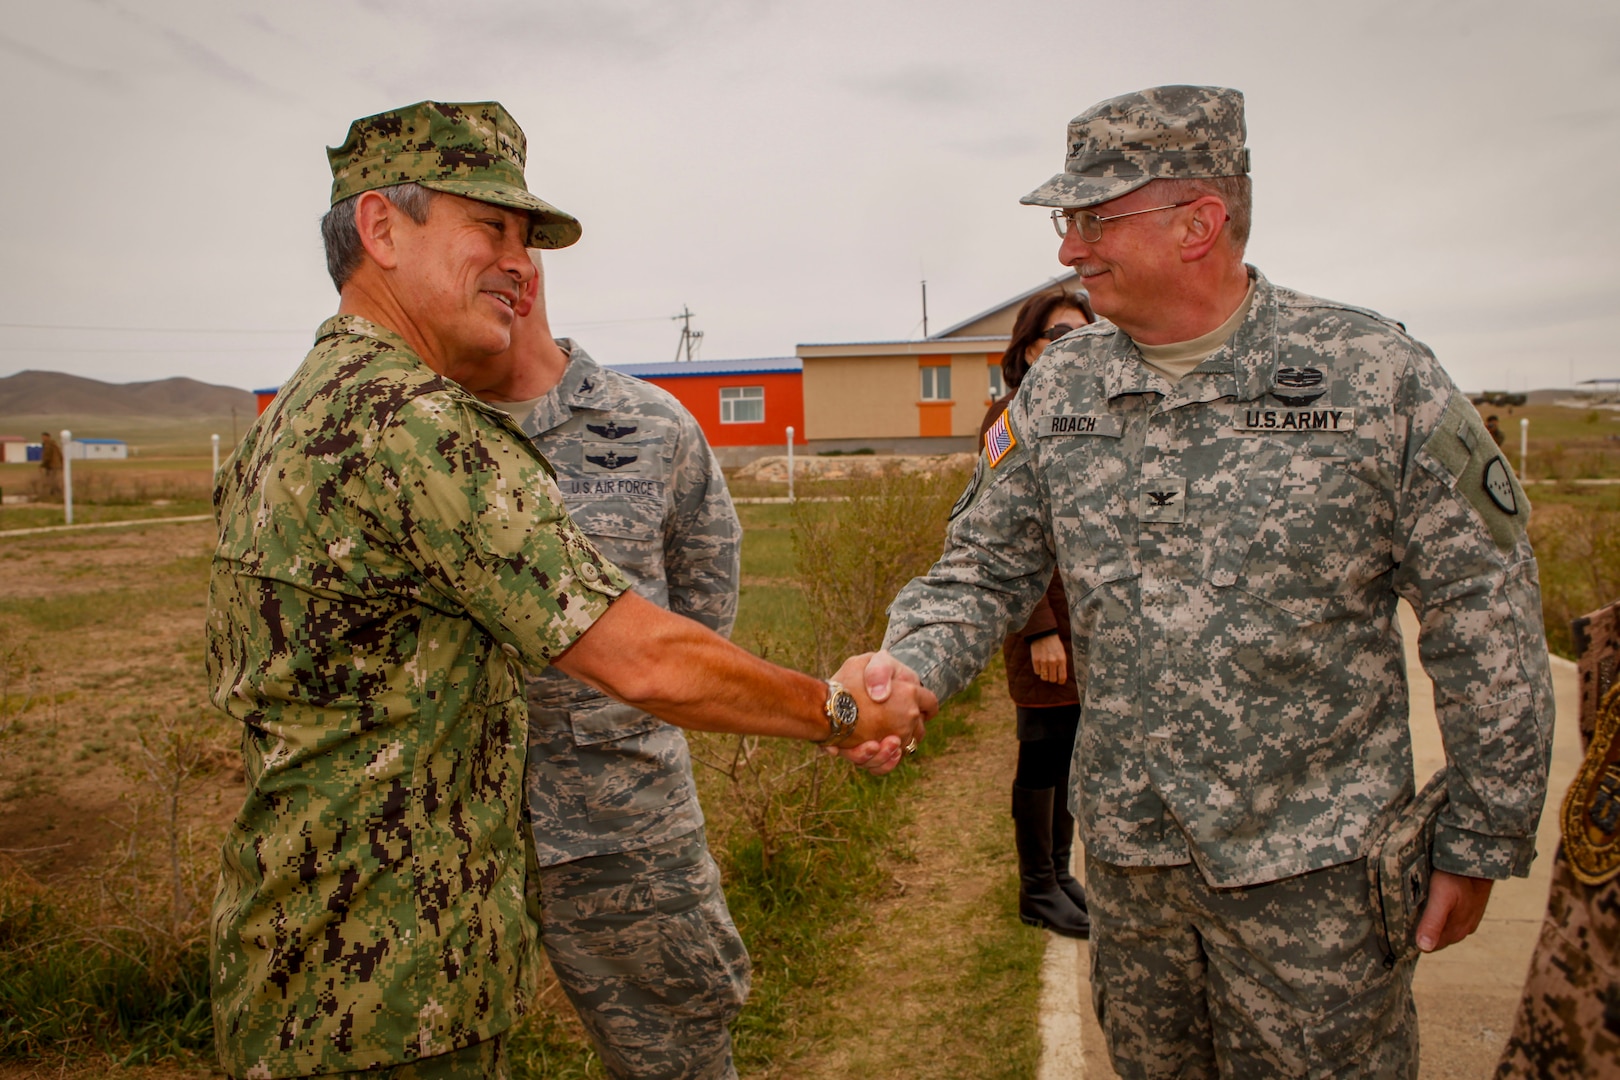 U.S. Navy Adm. Harry B. Harris, commander, U.S. Pacific Command, greets U.S. Army Col. Jeffrey Roach, commander, 38th Troop Command, before the Khaan Quest 2016 opening ceremony at the Five Hills Training Area, Mongolia, May 22, 2016. Khaan Quest is an annual, multinational peacekeeping operations exercise conducted in Mongolia and is the capstone exercise for this year's United Nations Global Peace Operations Initiative program. 